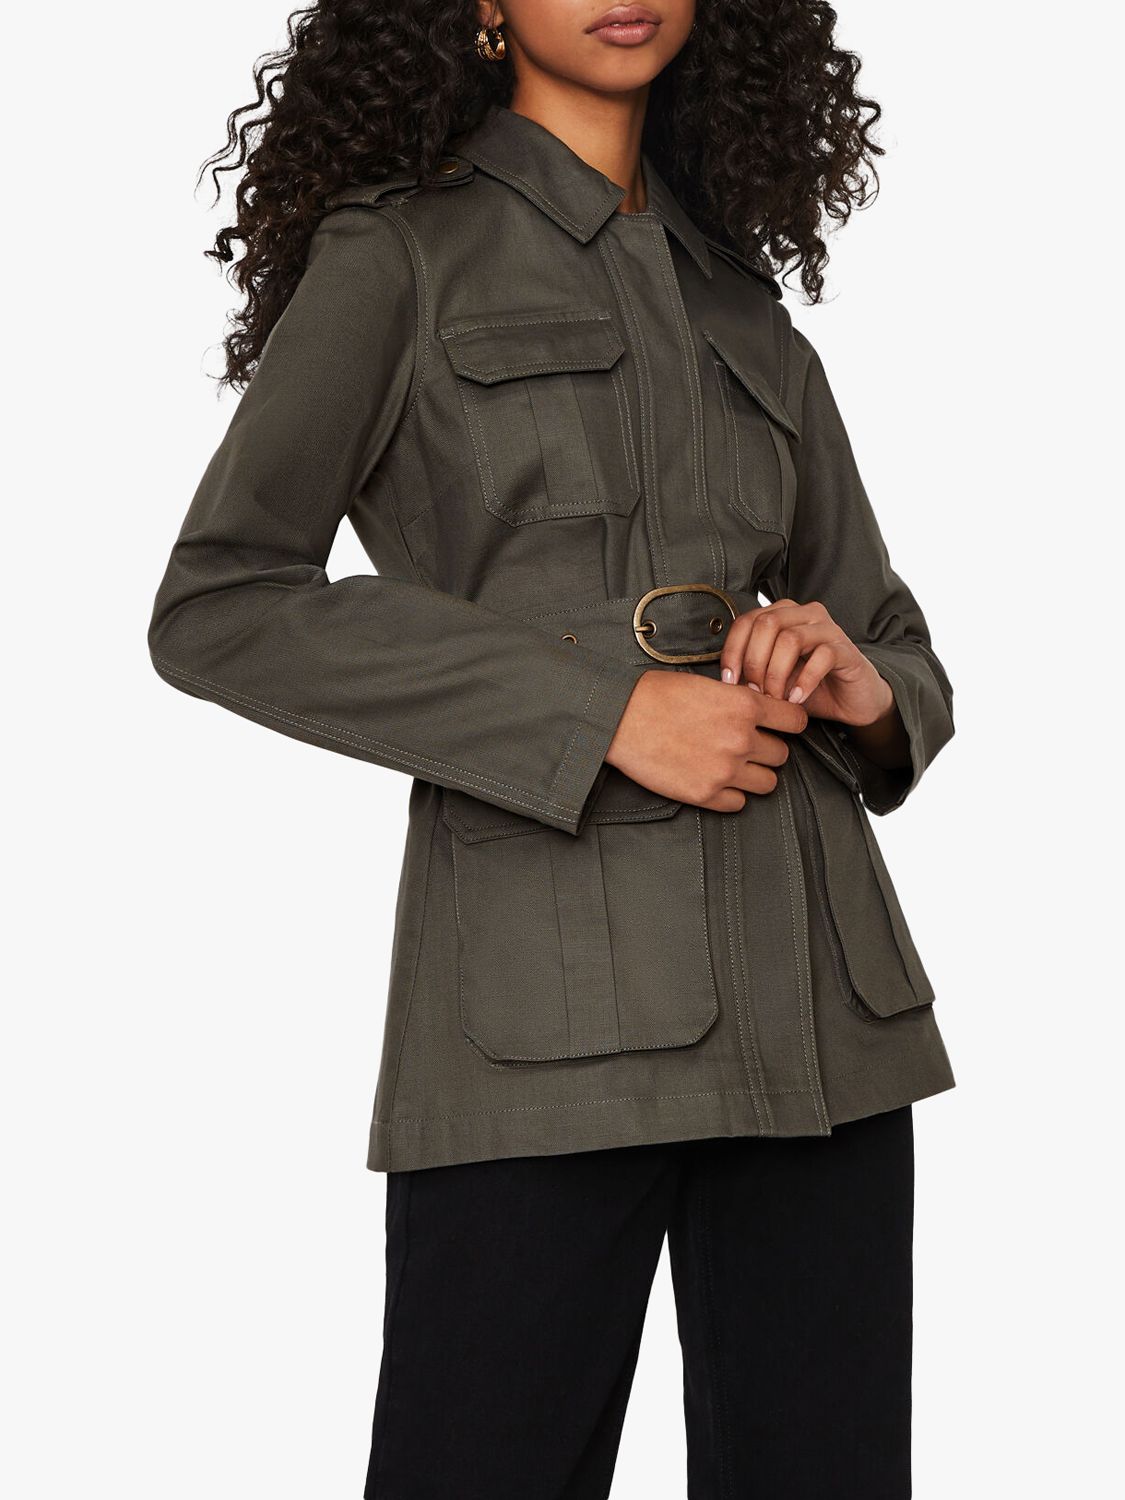 Warehouse Khaki Green Utility Military Casual Sprint Belted Jacket 